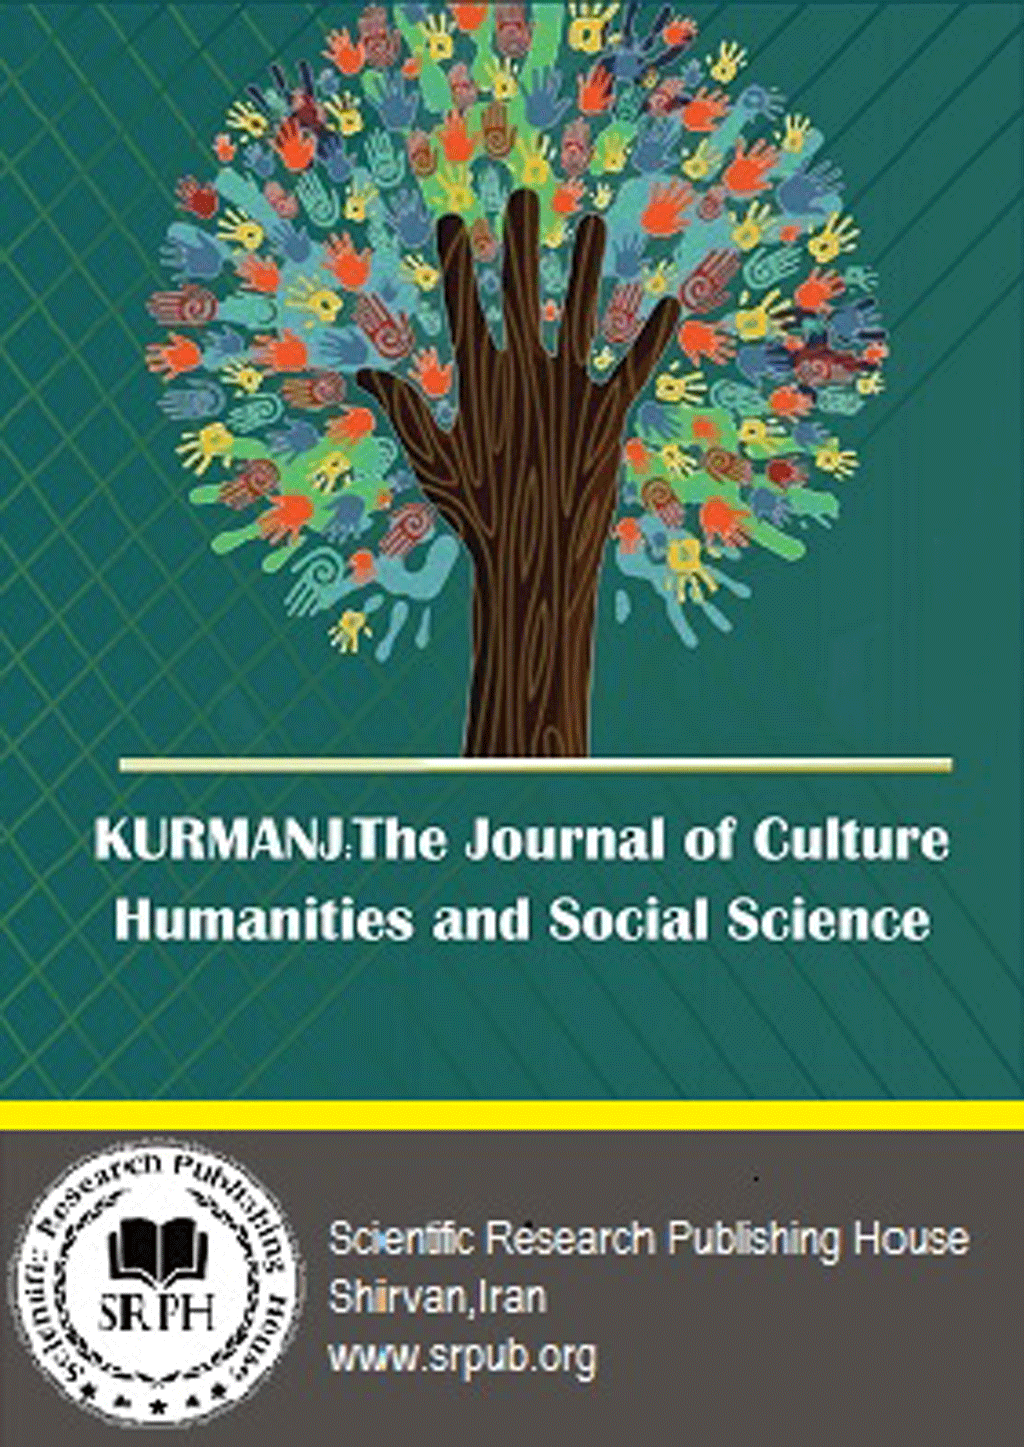 Culture, Humanities and Social Science - Autumn 2020, Volume 2 - Number 4